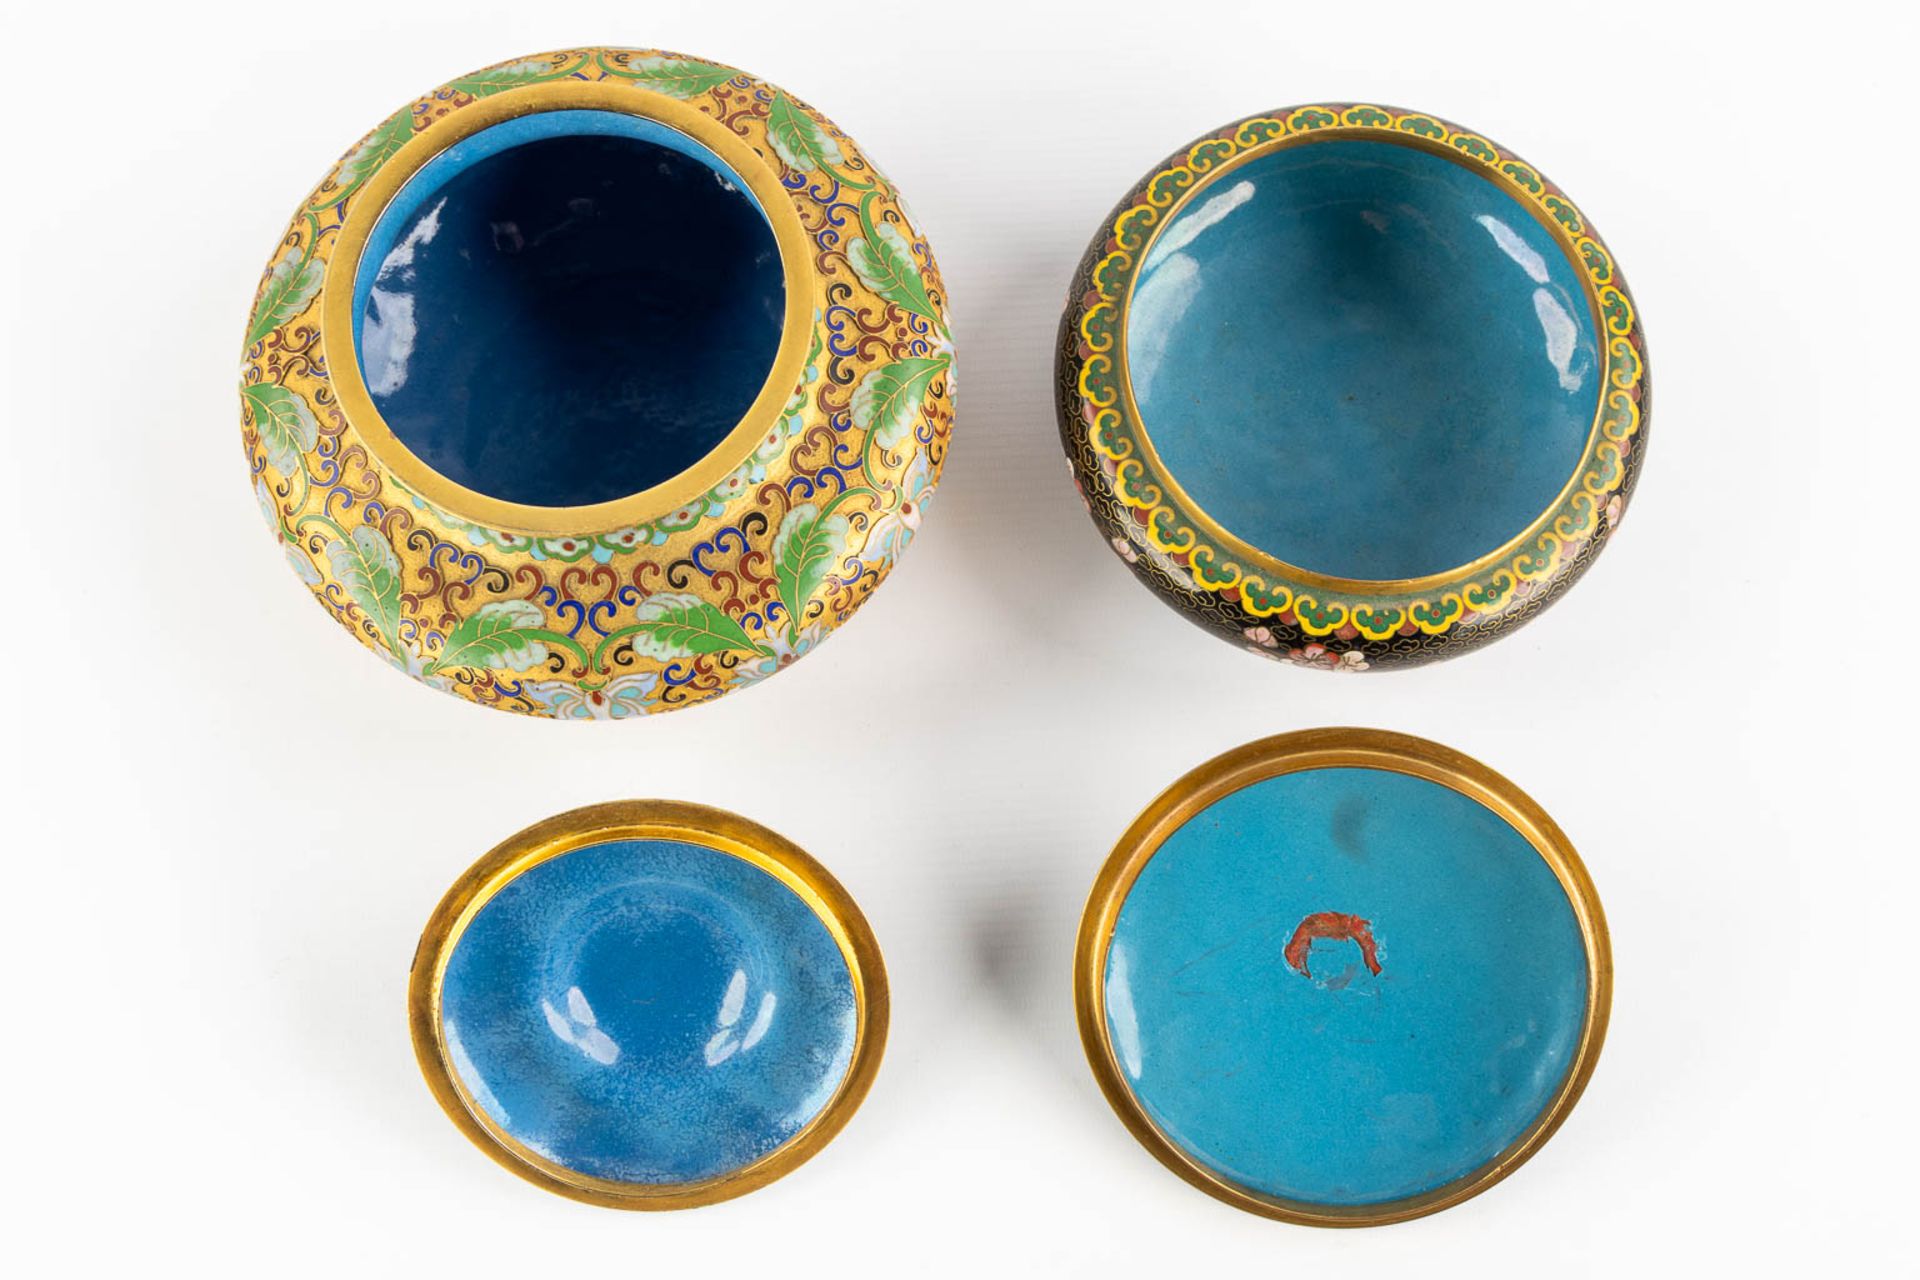 Twelve pieces of Cloisonné enamelled vases and trinklet bowls. Three pairs. (H:23 cm) - Image 4 of 14